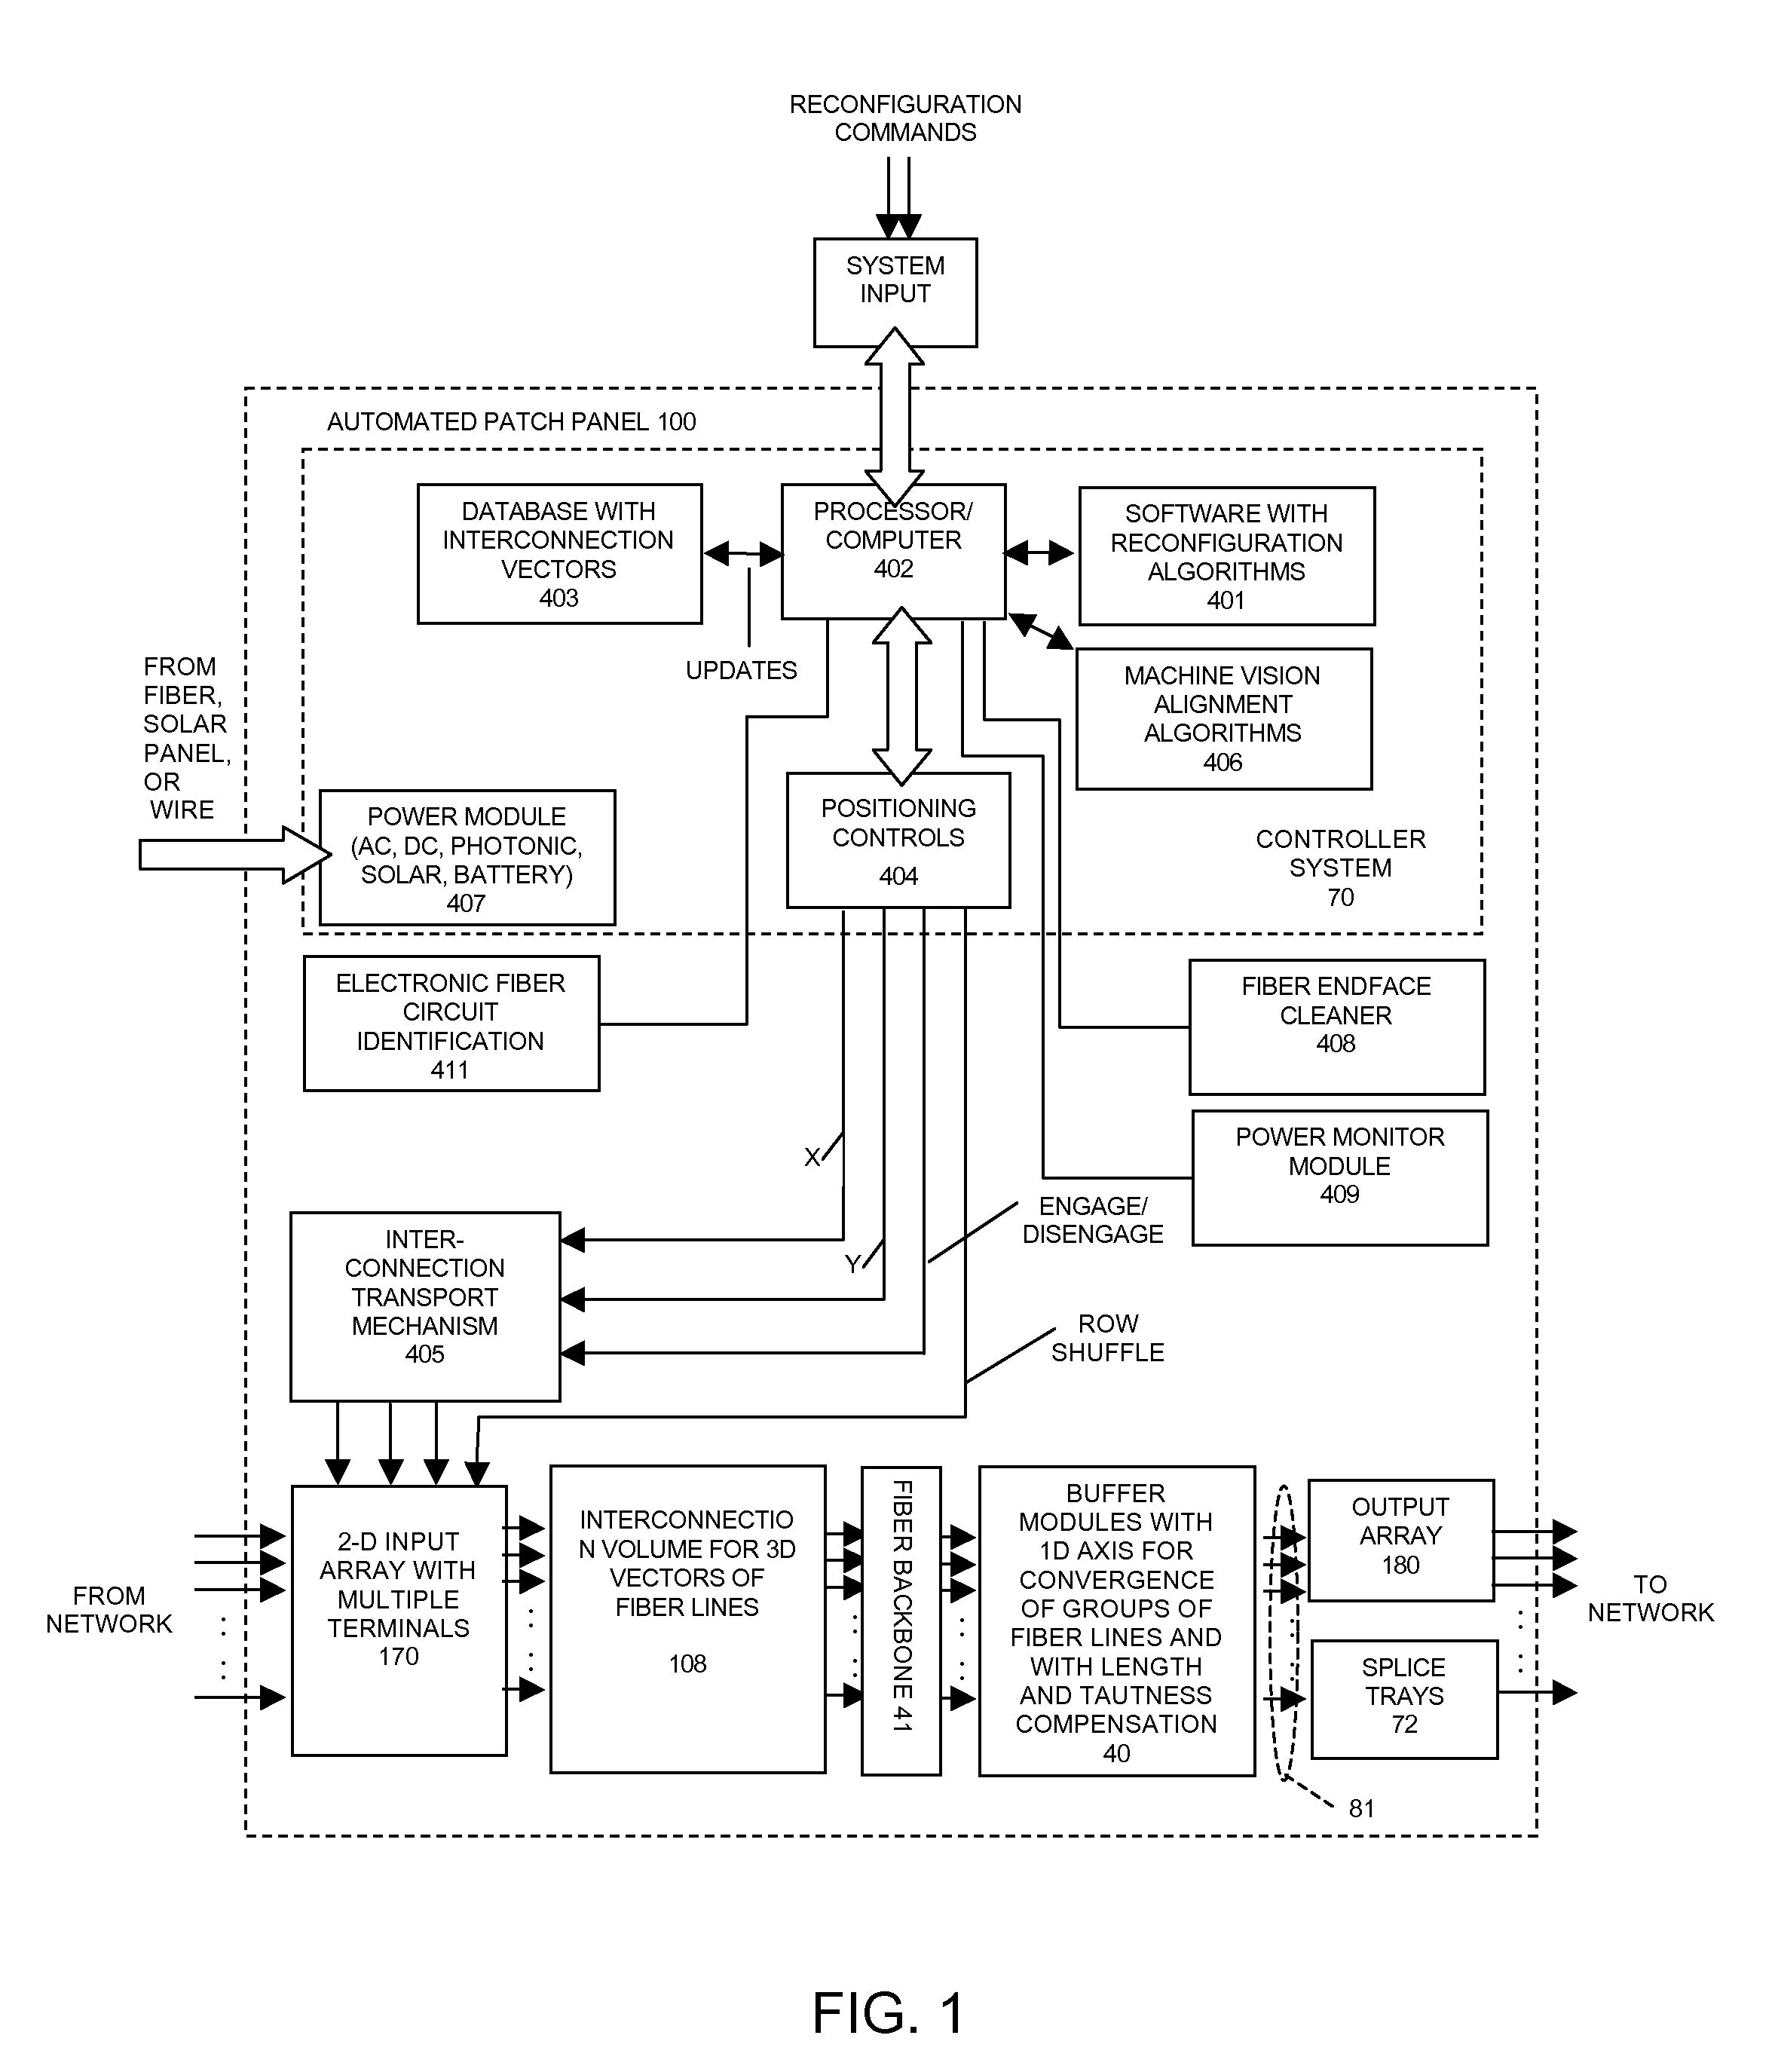 Methods to reconfigure all-fiber optical cross-connects